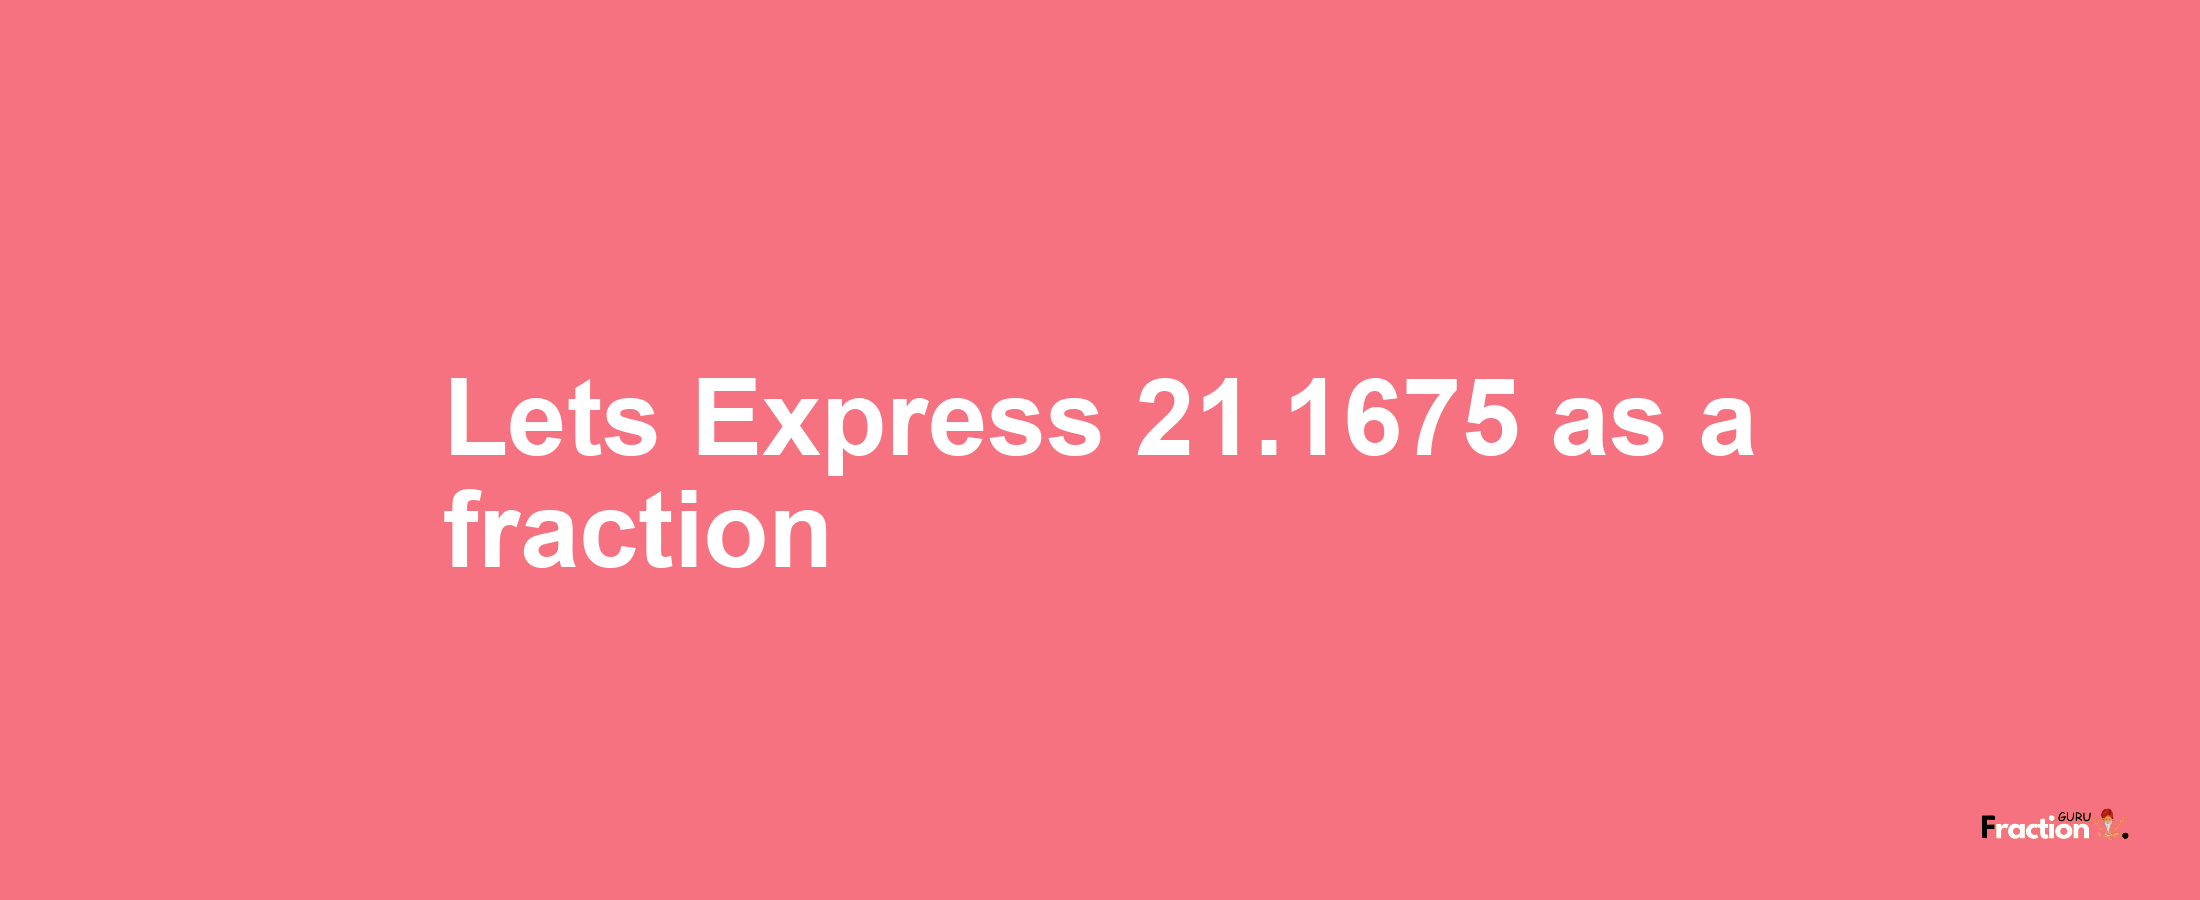 Lets Express 21.1675 as afraction